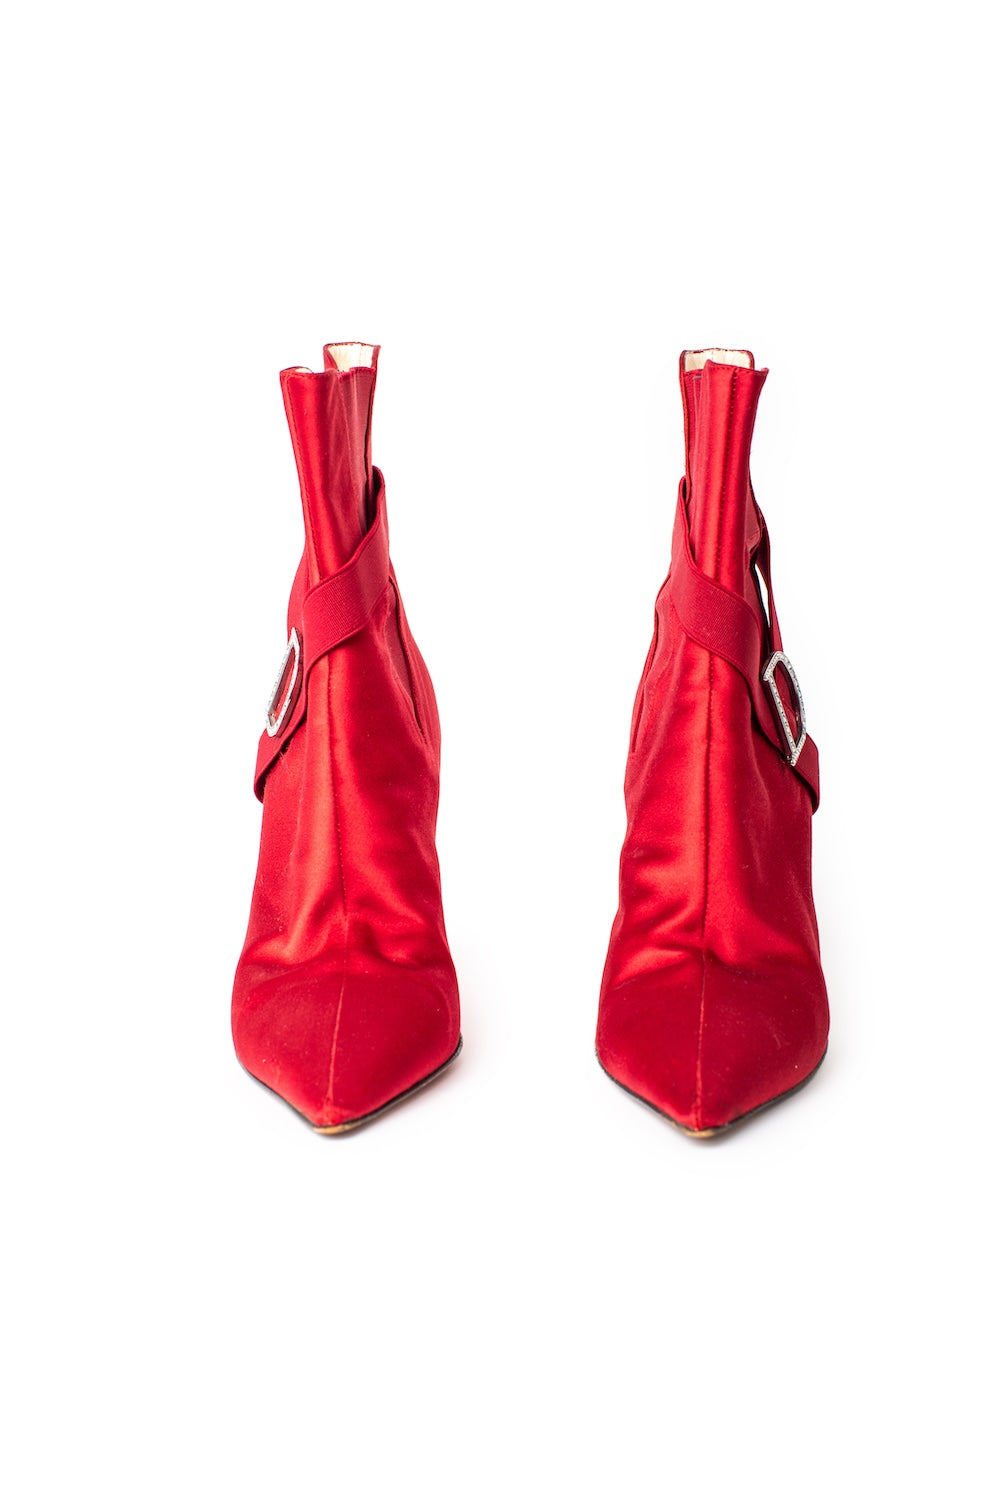 Christian Dior <br> c2003 John Galliano red satin boots with crystal logos